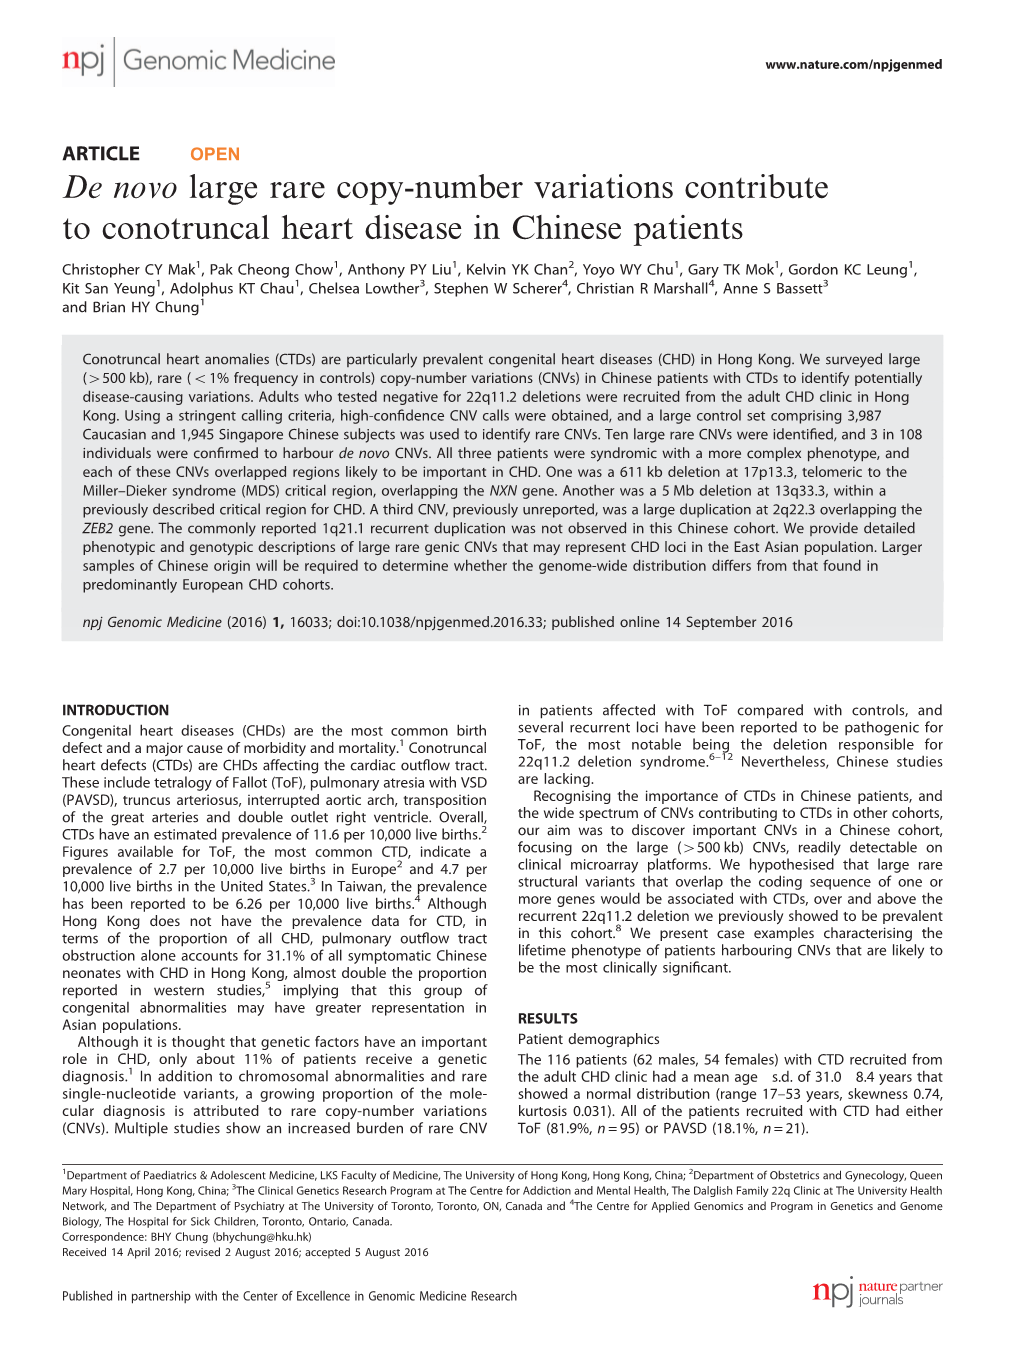 De Novo Large Rare Copy-Number Variations Contribute to Conotruncal Heart Disease in Chinese Patients